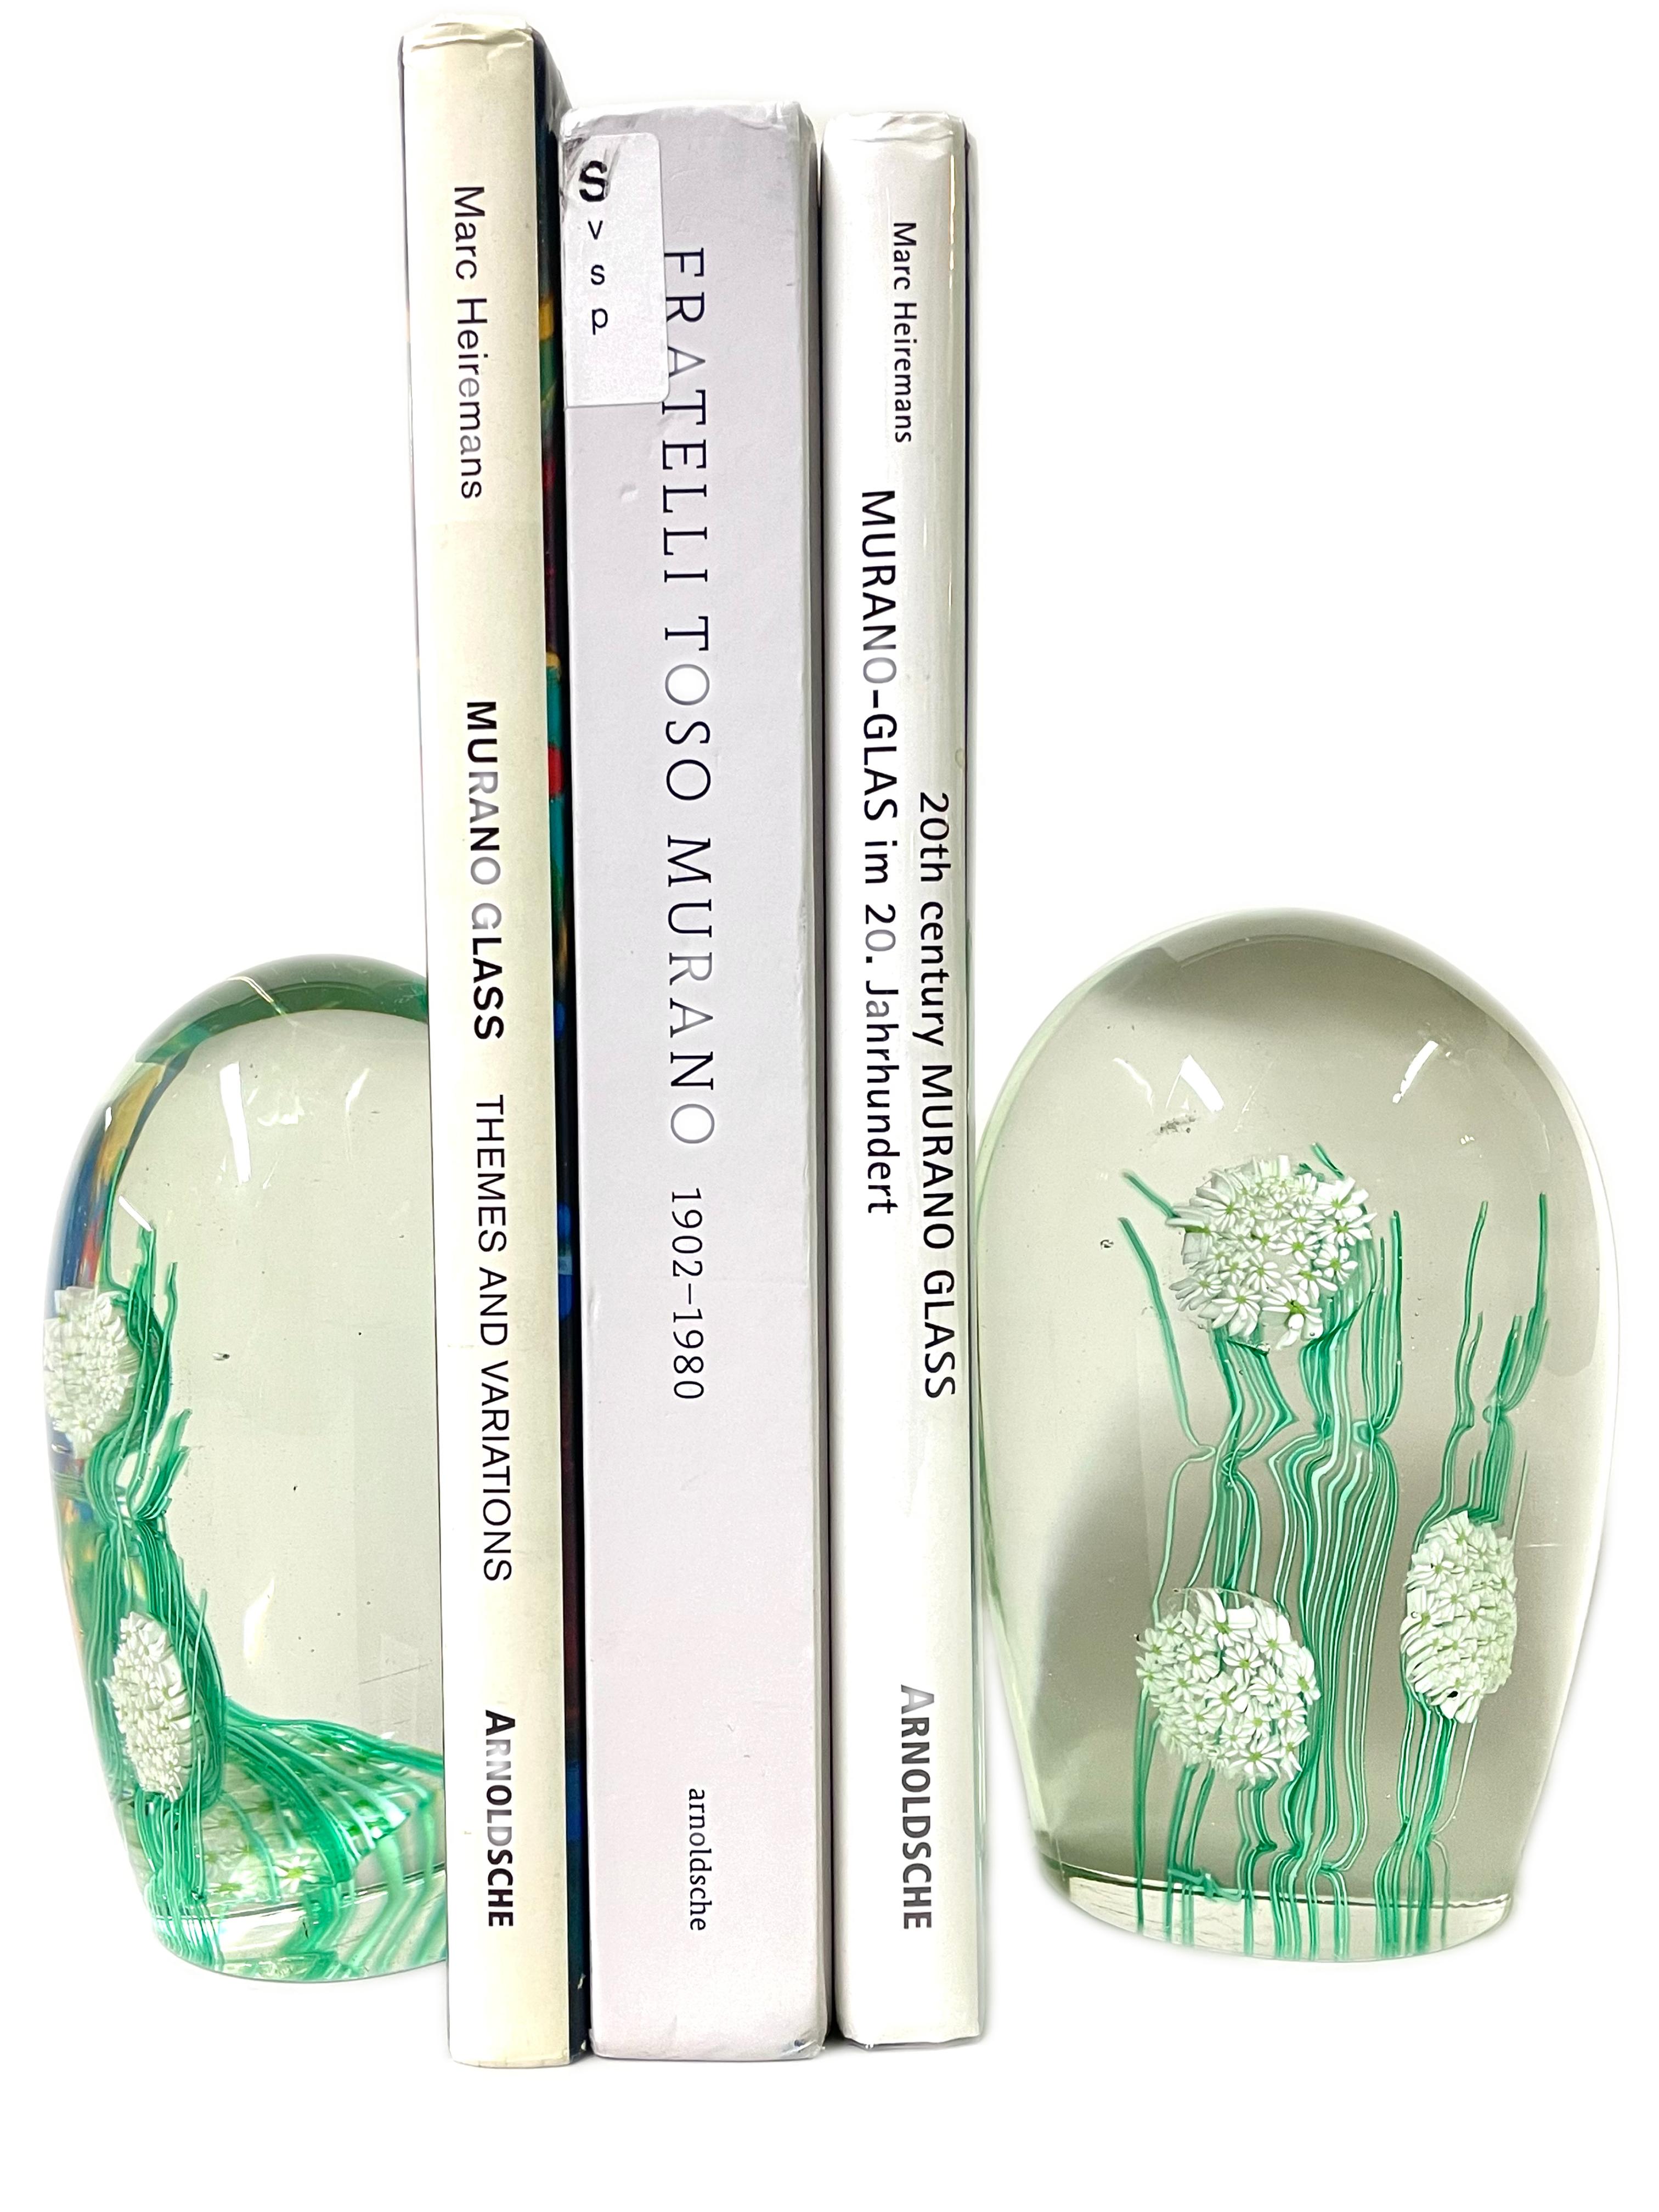 20th Century Mid-Century Modern Italian Art Glass Murano Floral Decorated Bookends For Sale